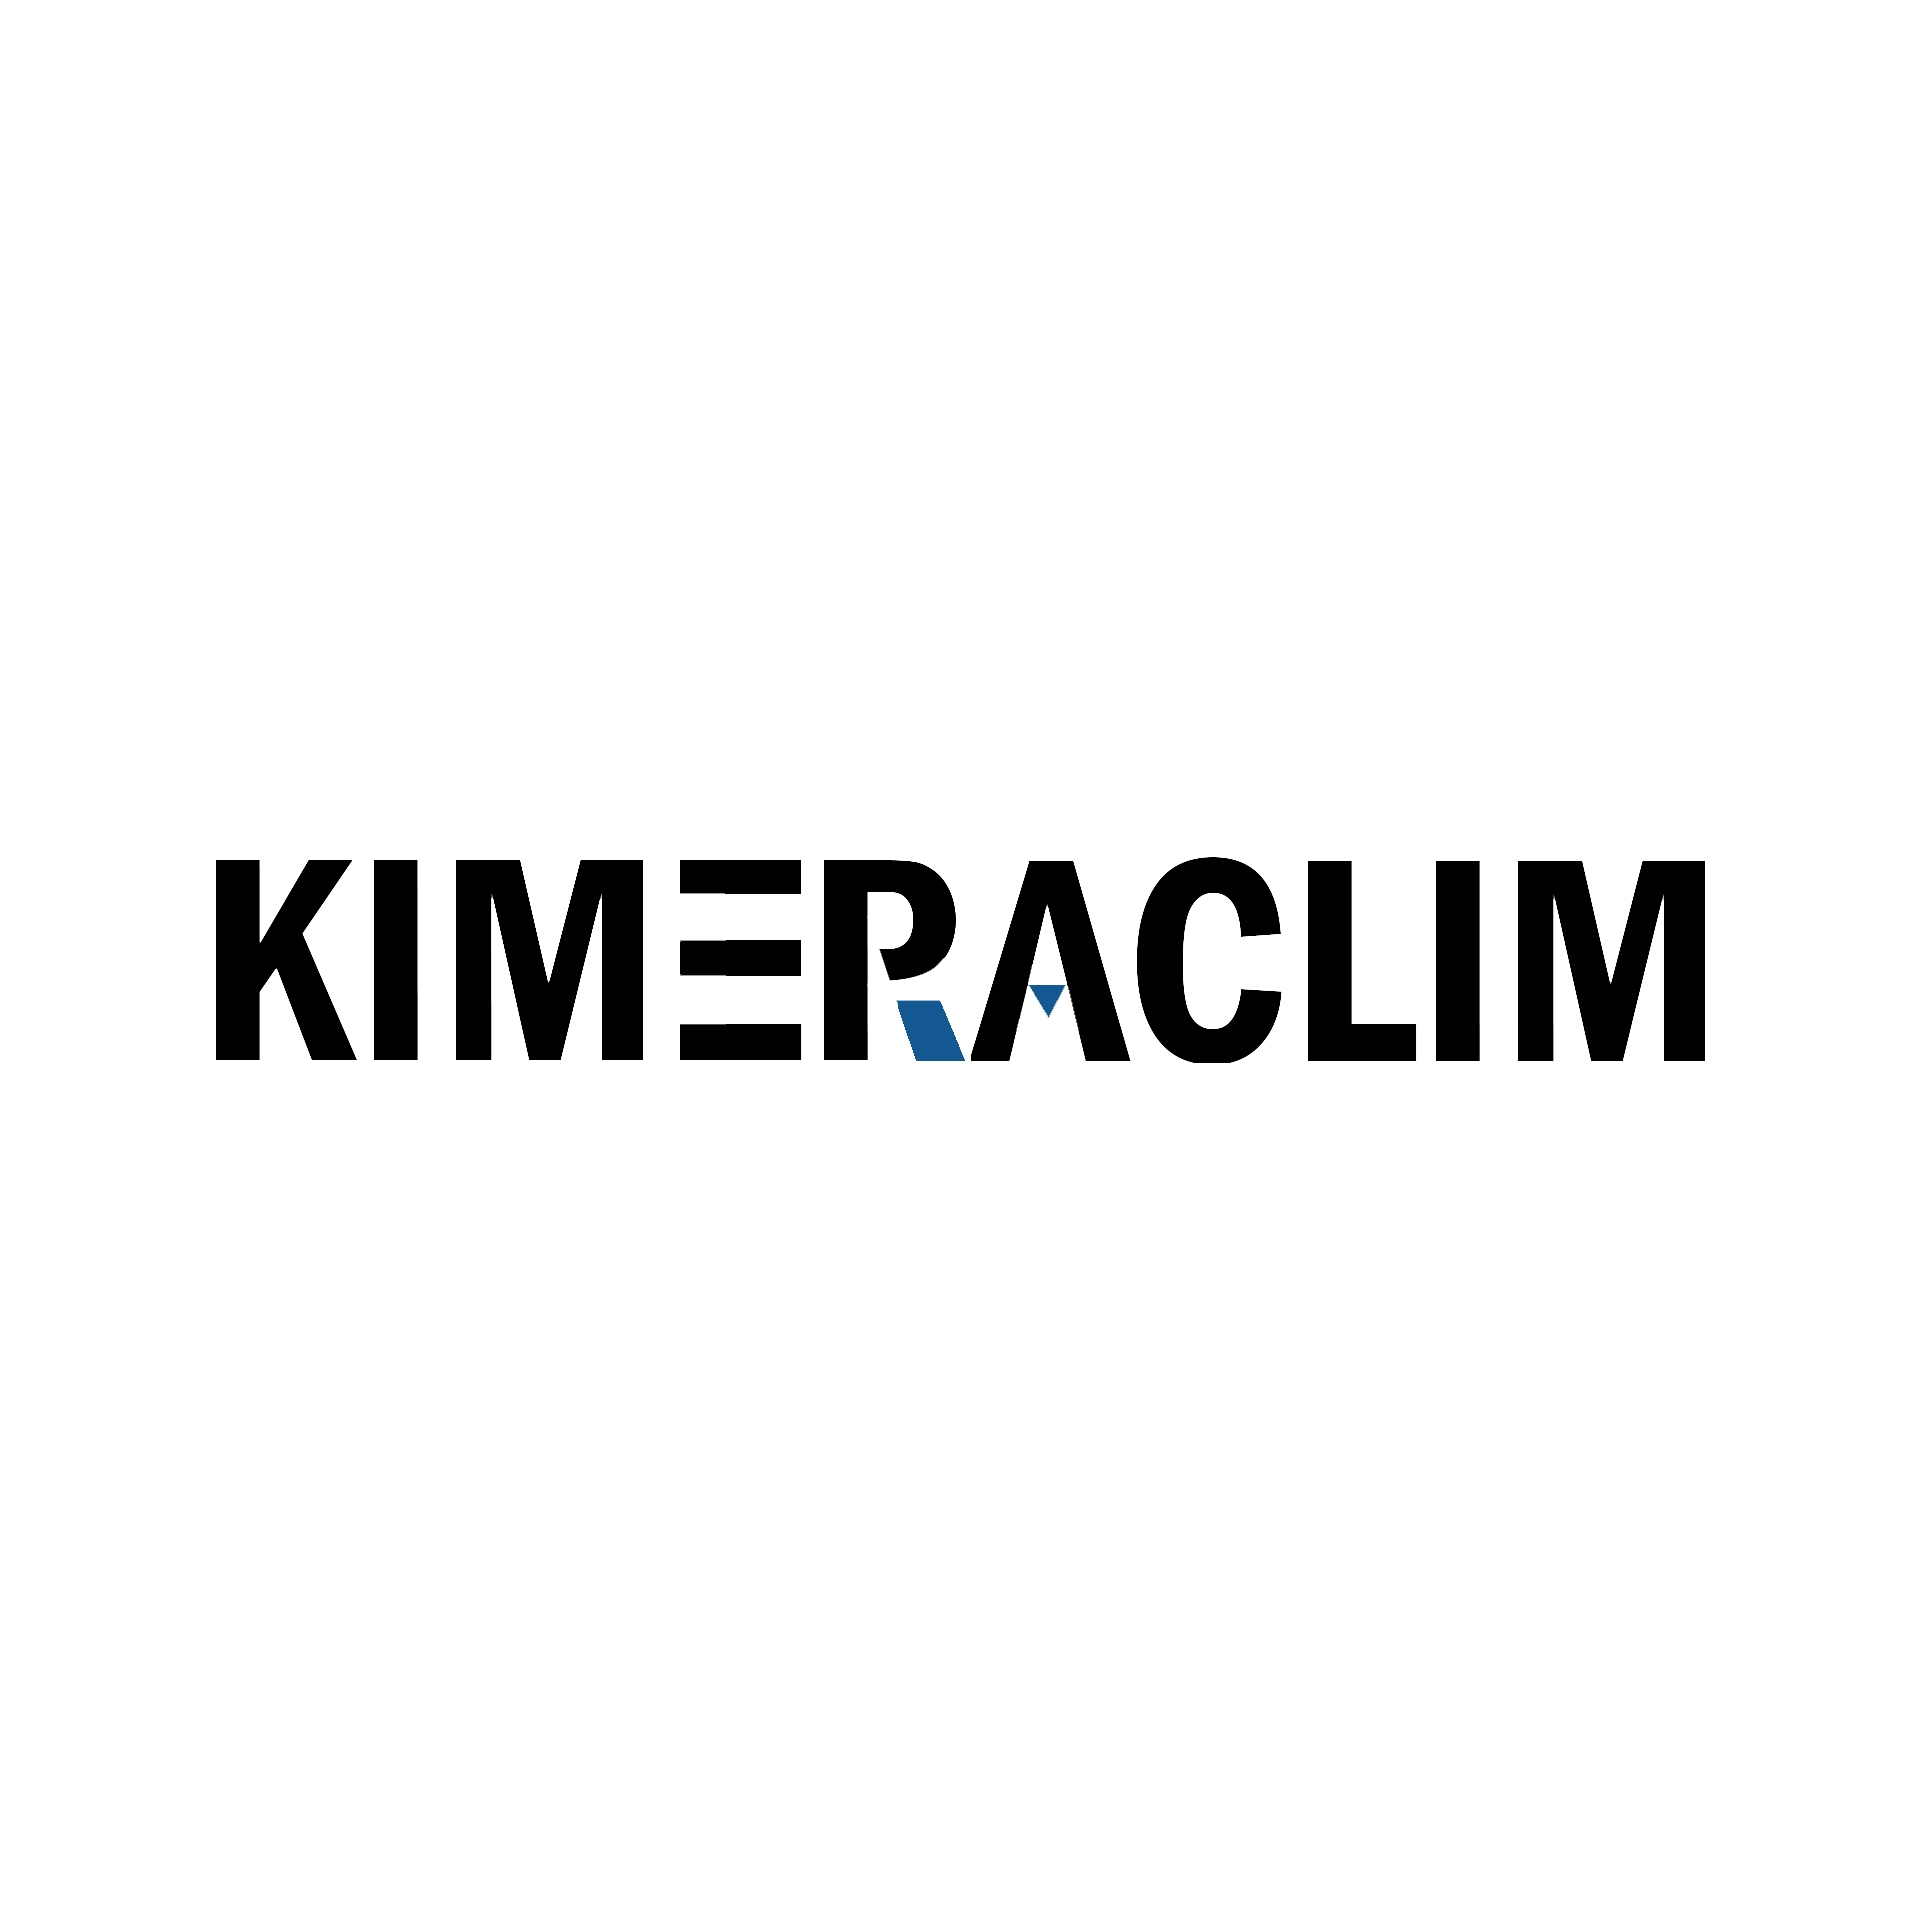 Kimera Climatisation Inc. - Thermopompe, Chauffage, Air climatisé - Heating Contractors